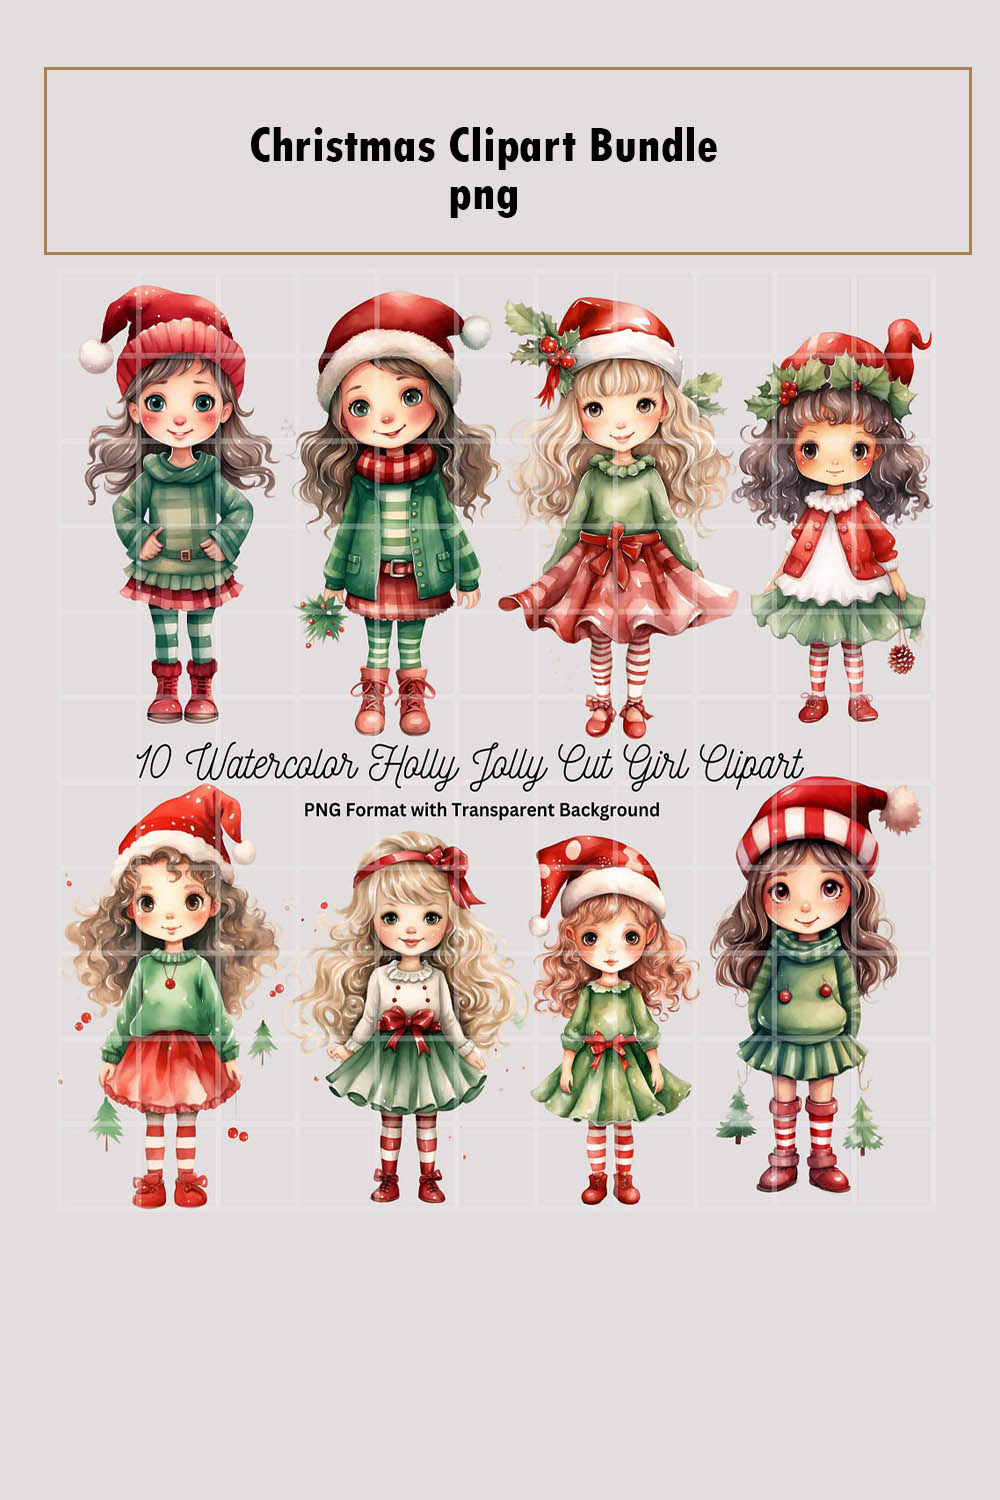 10 Watercolor Holly Jolly cute girl clipart, Christmas Decor Clipart in PNG, Paper craft, print pinterest preview image.